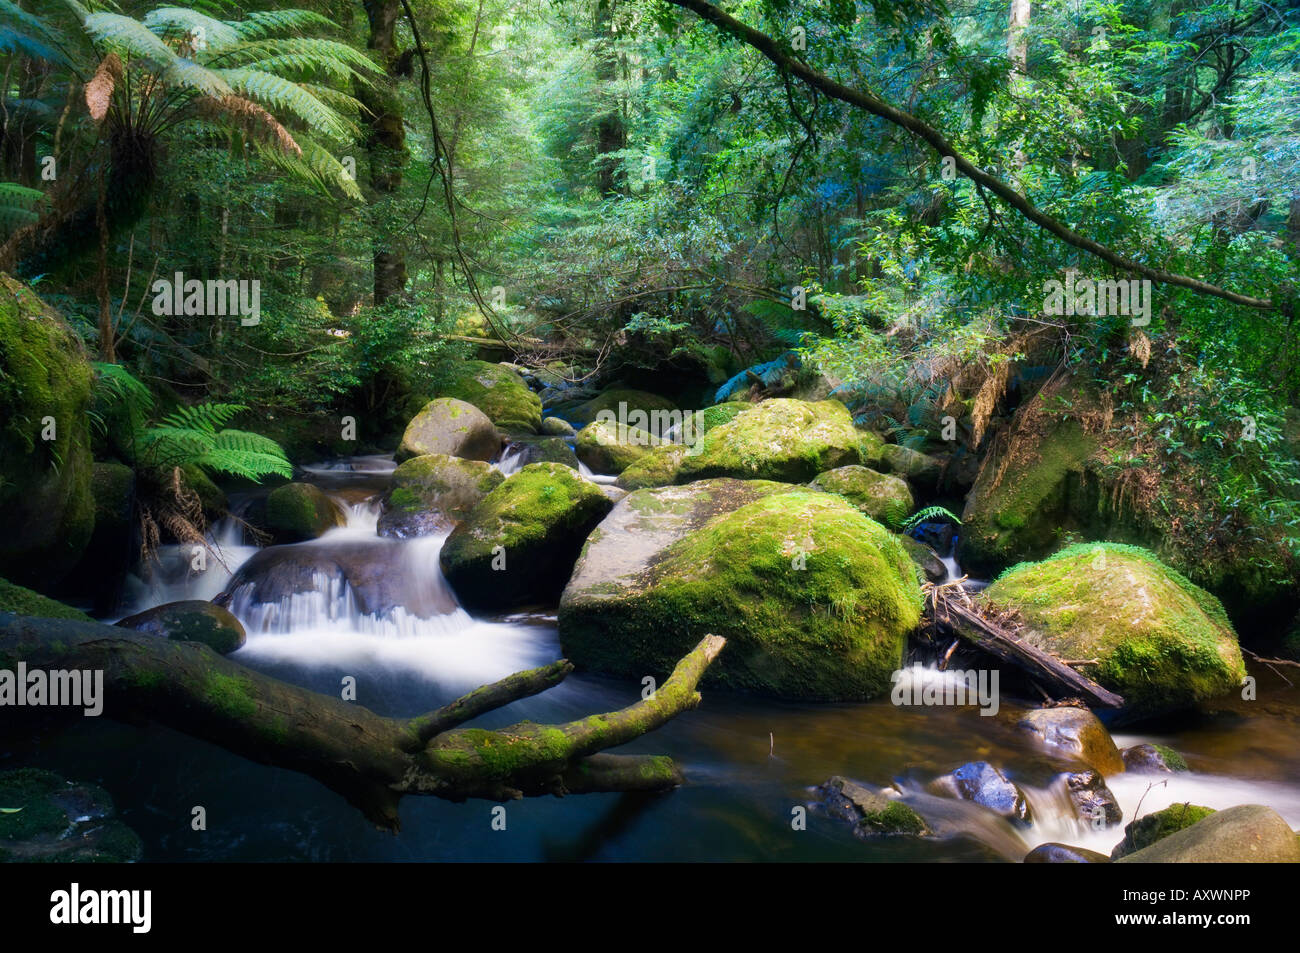 Taggerty River, tree ferns and myrtle beech trees in the temperate rainforest, Yarra Ranges National Park, Victoria, Australia Stock Photo